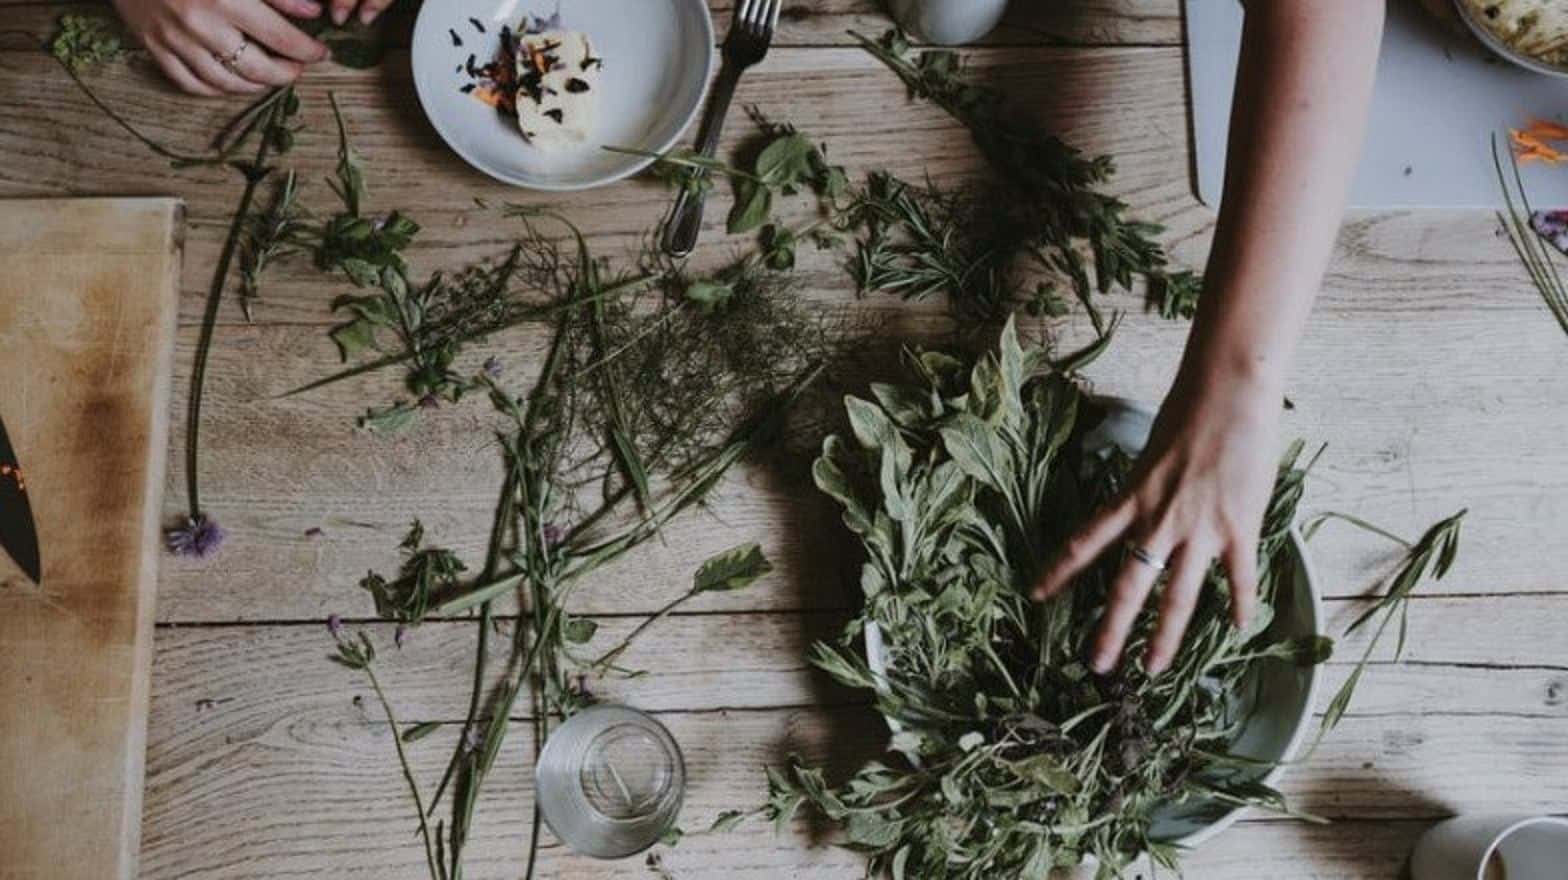 preparing and organizing dried herbs over a wooden counter